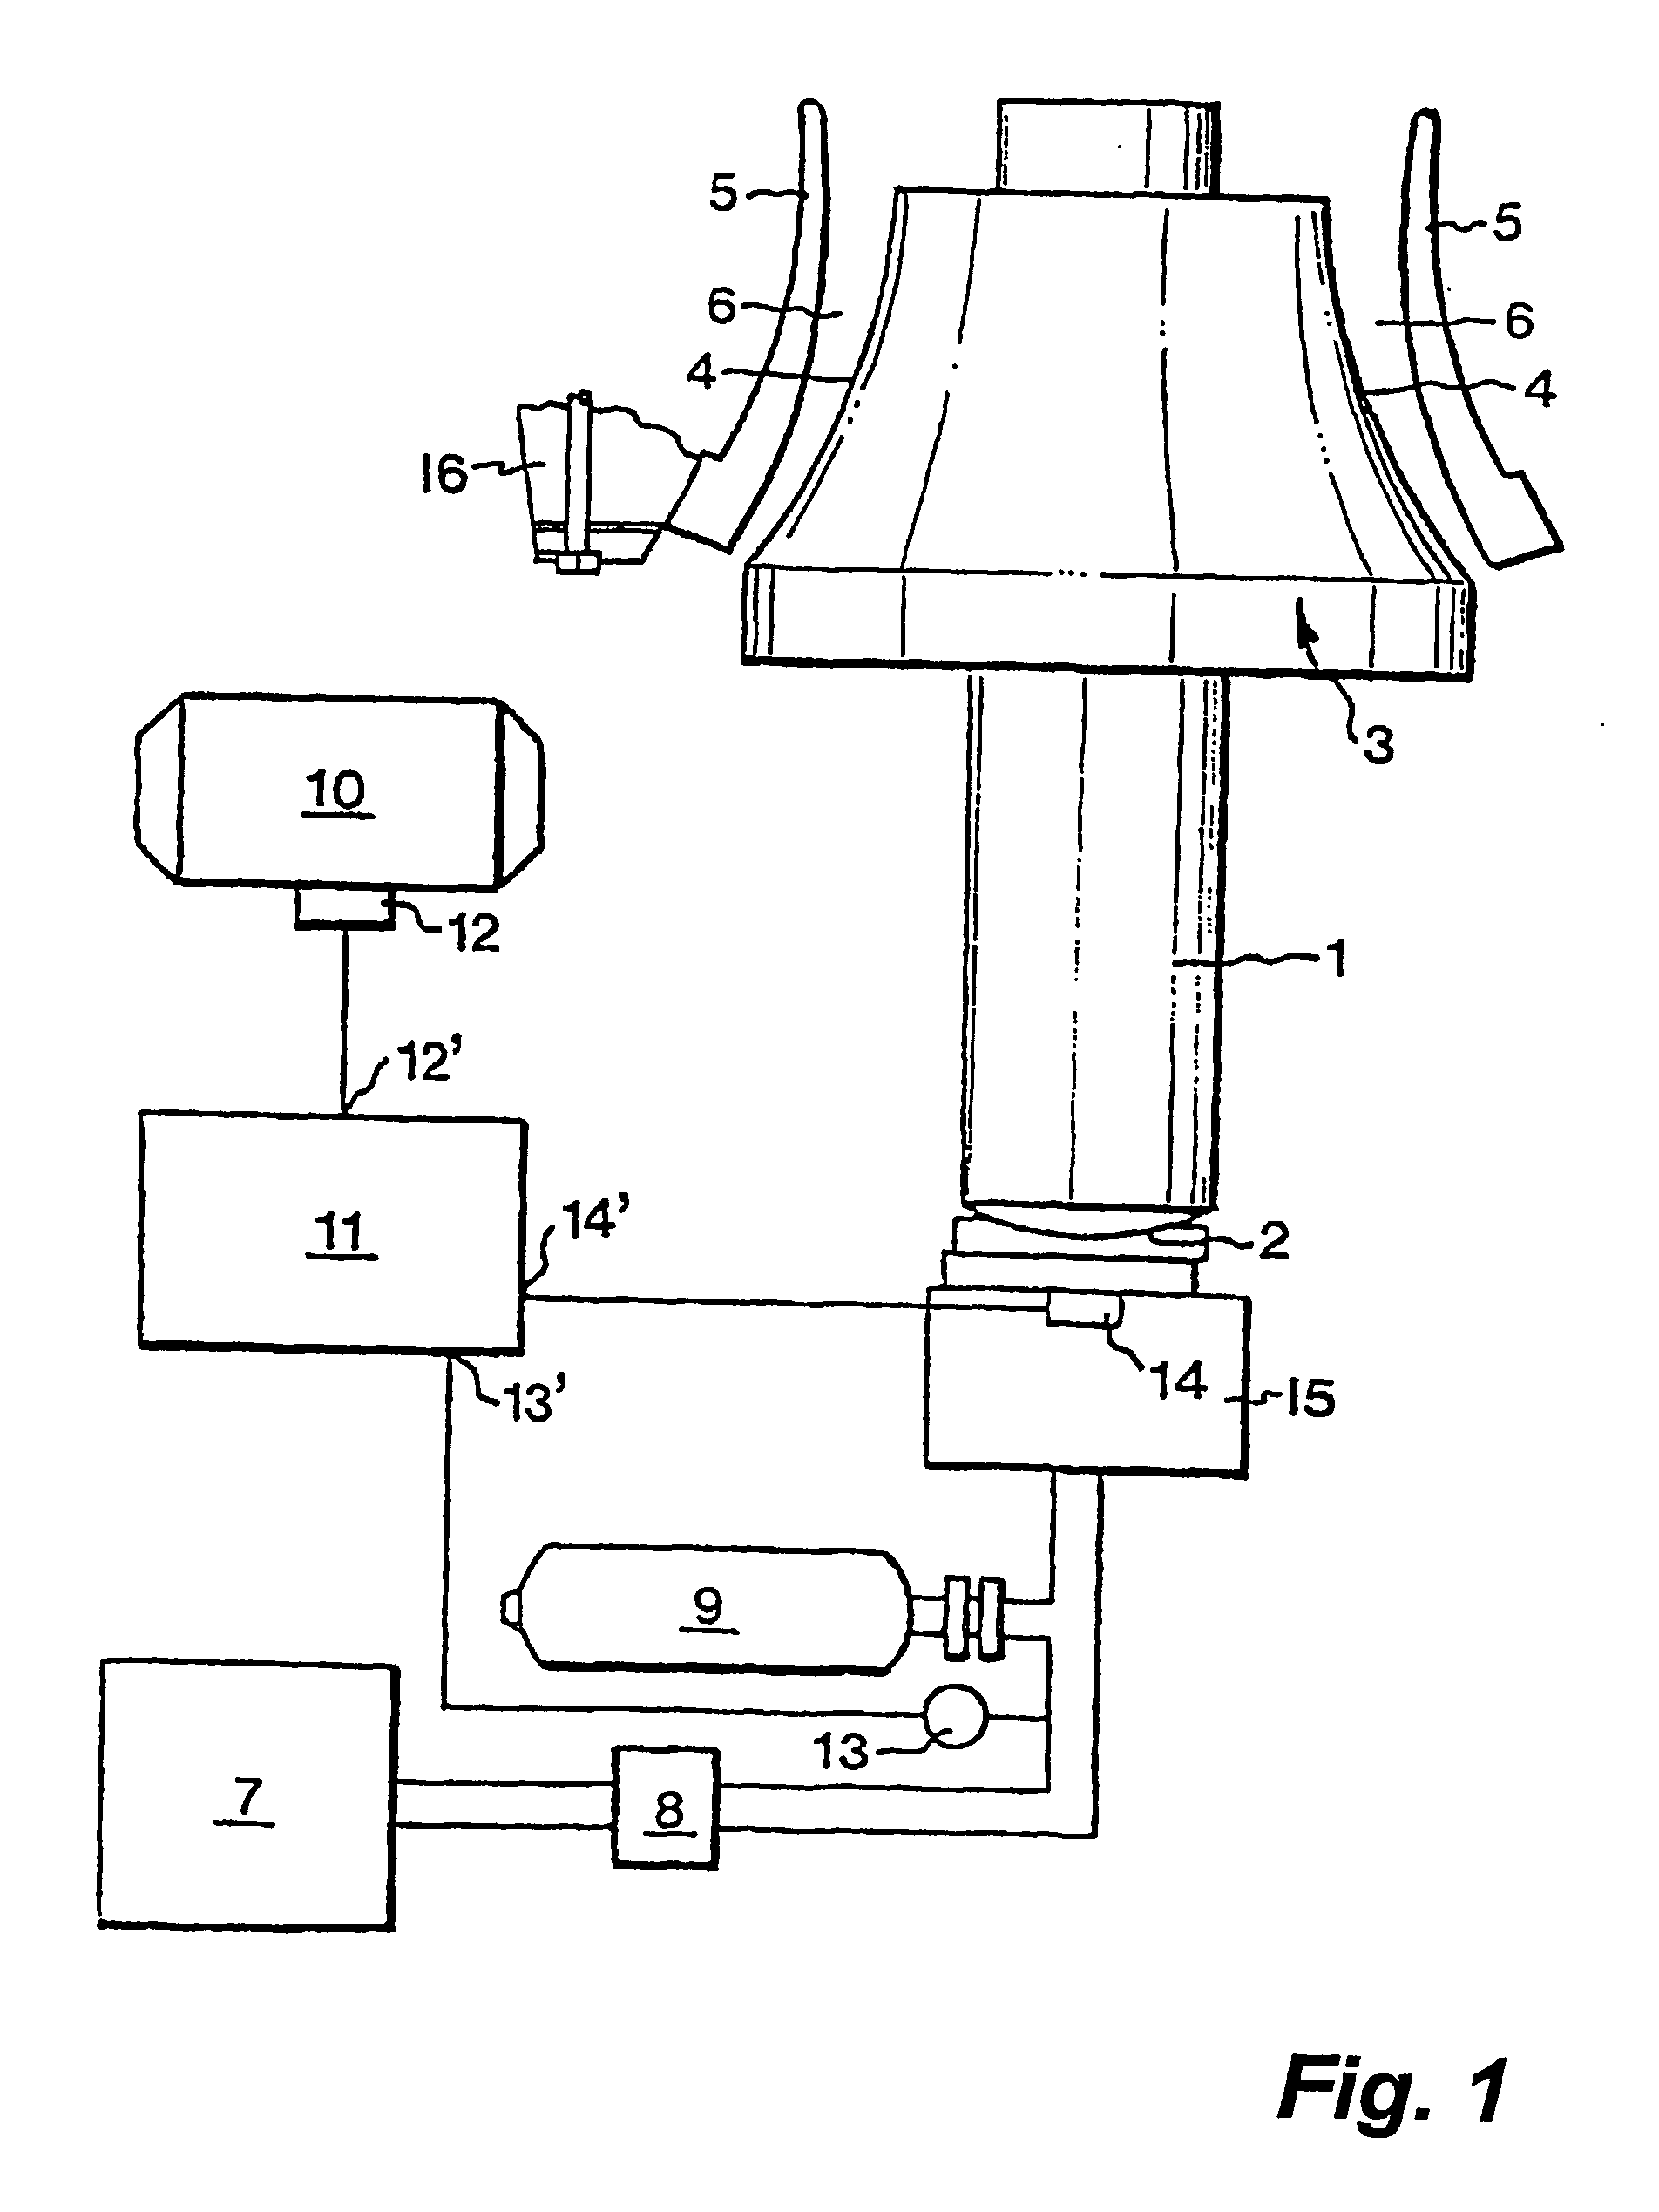 Method and control system for starting crushing in a gyratory crusher